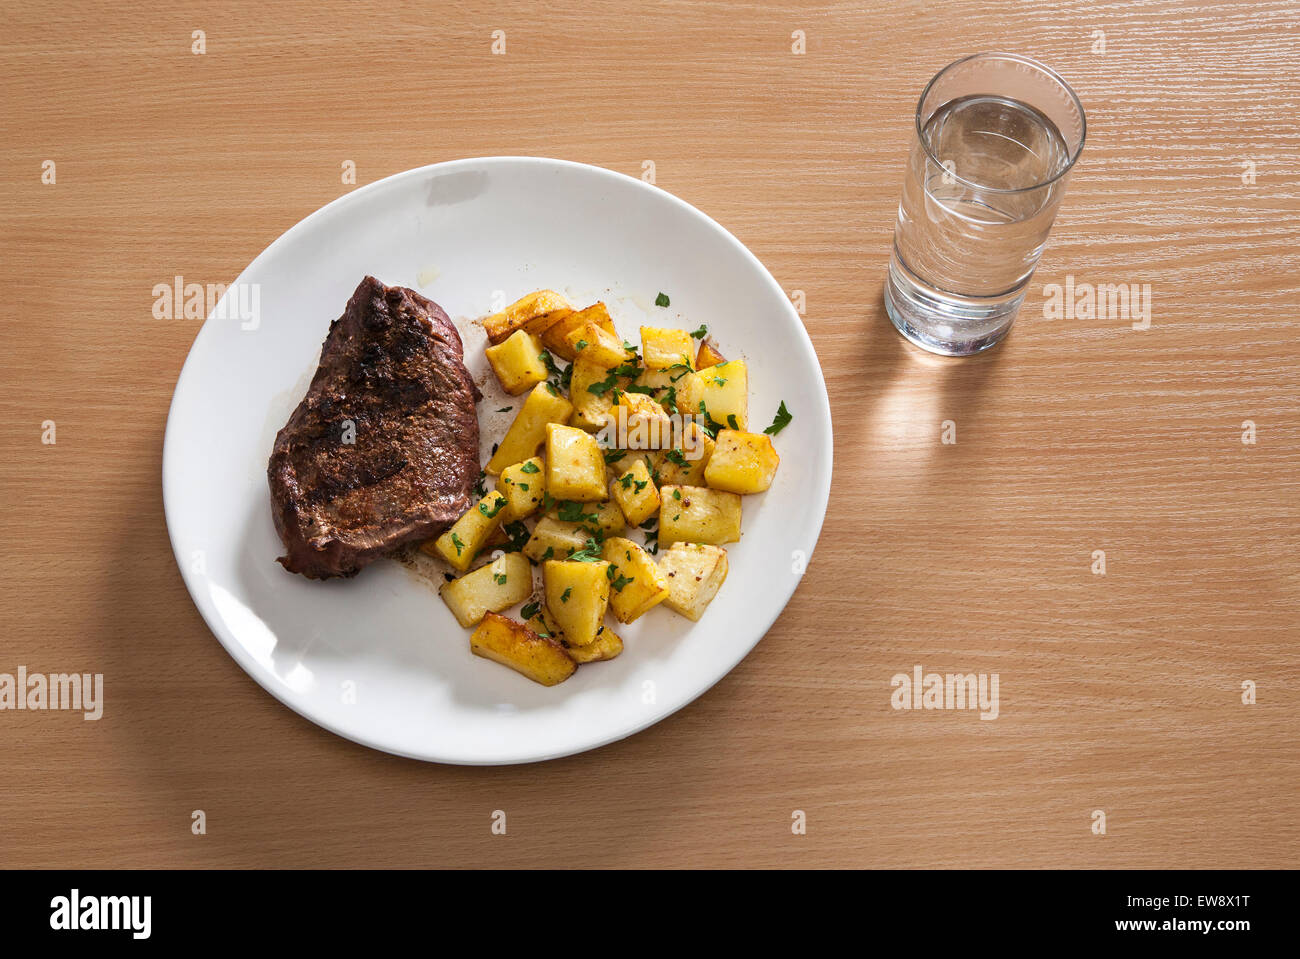 a plate with a steak and potatoes , with a glass of water Stock Photo